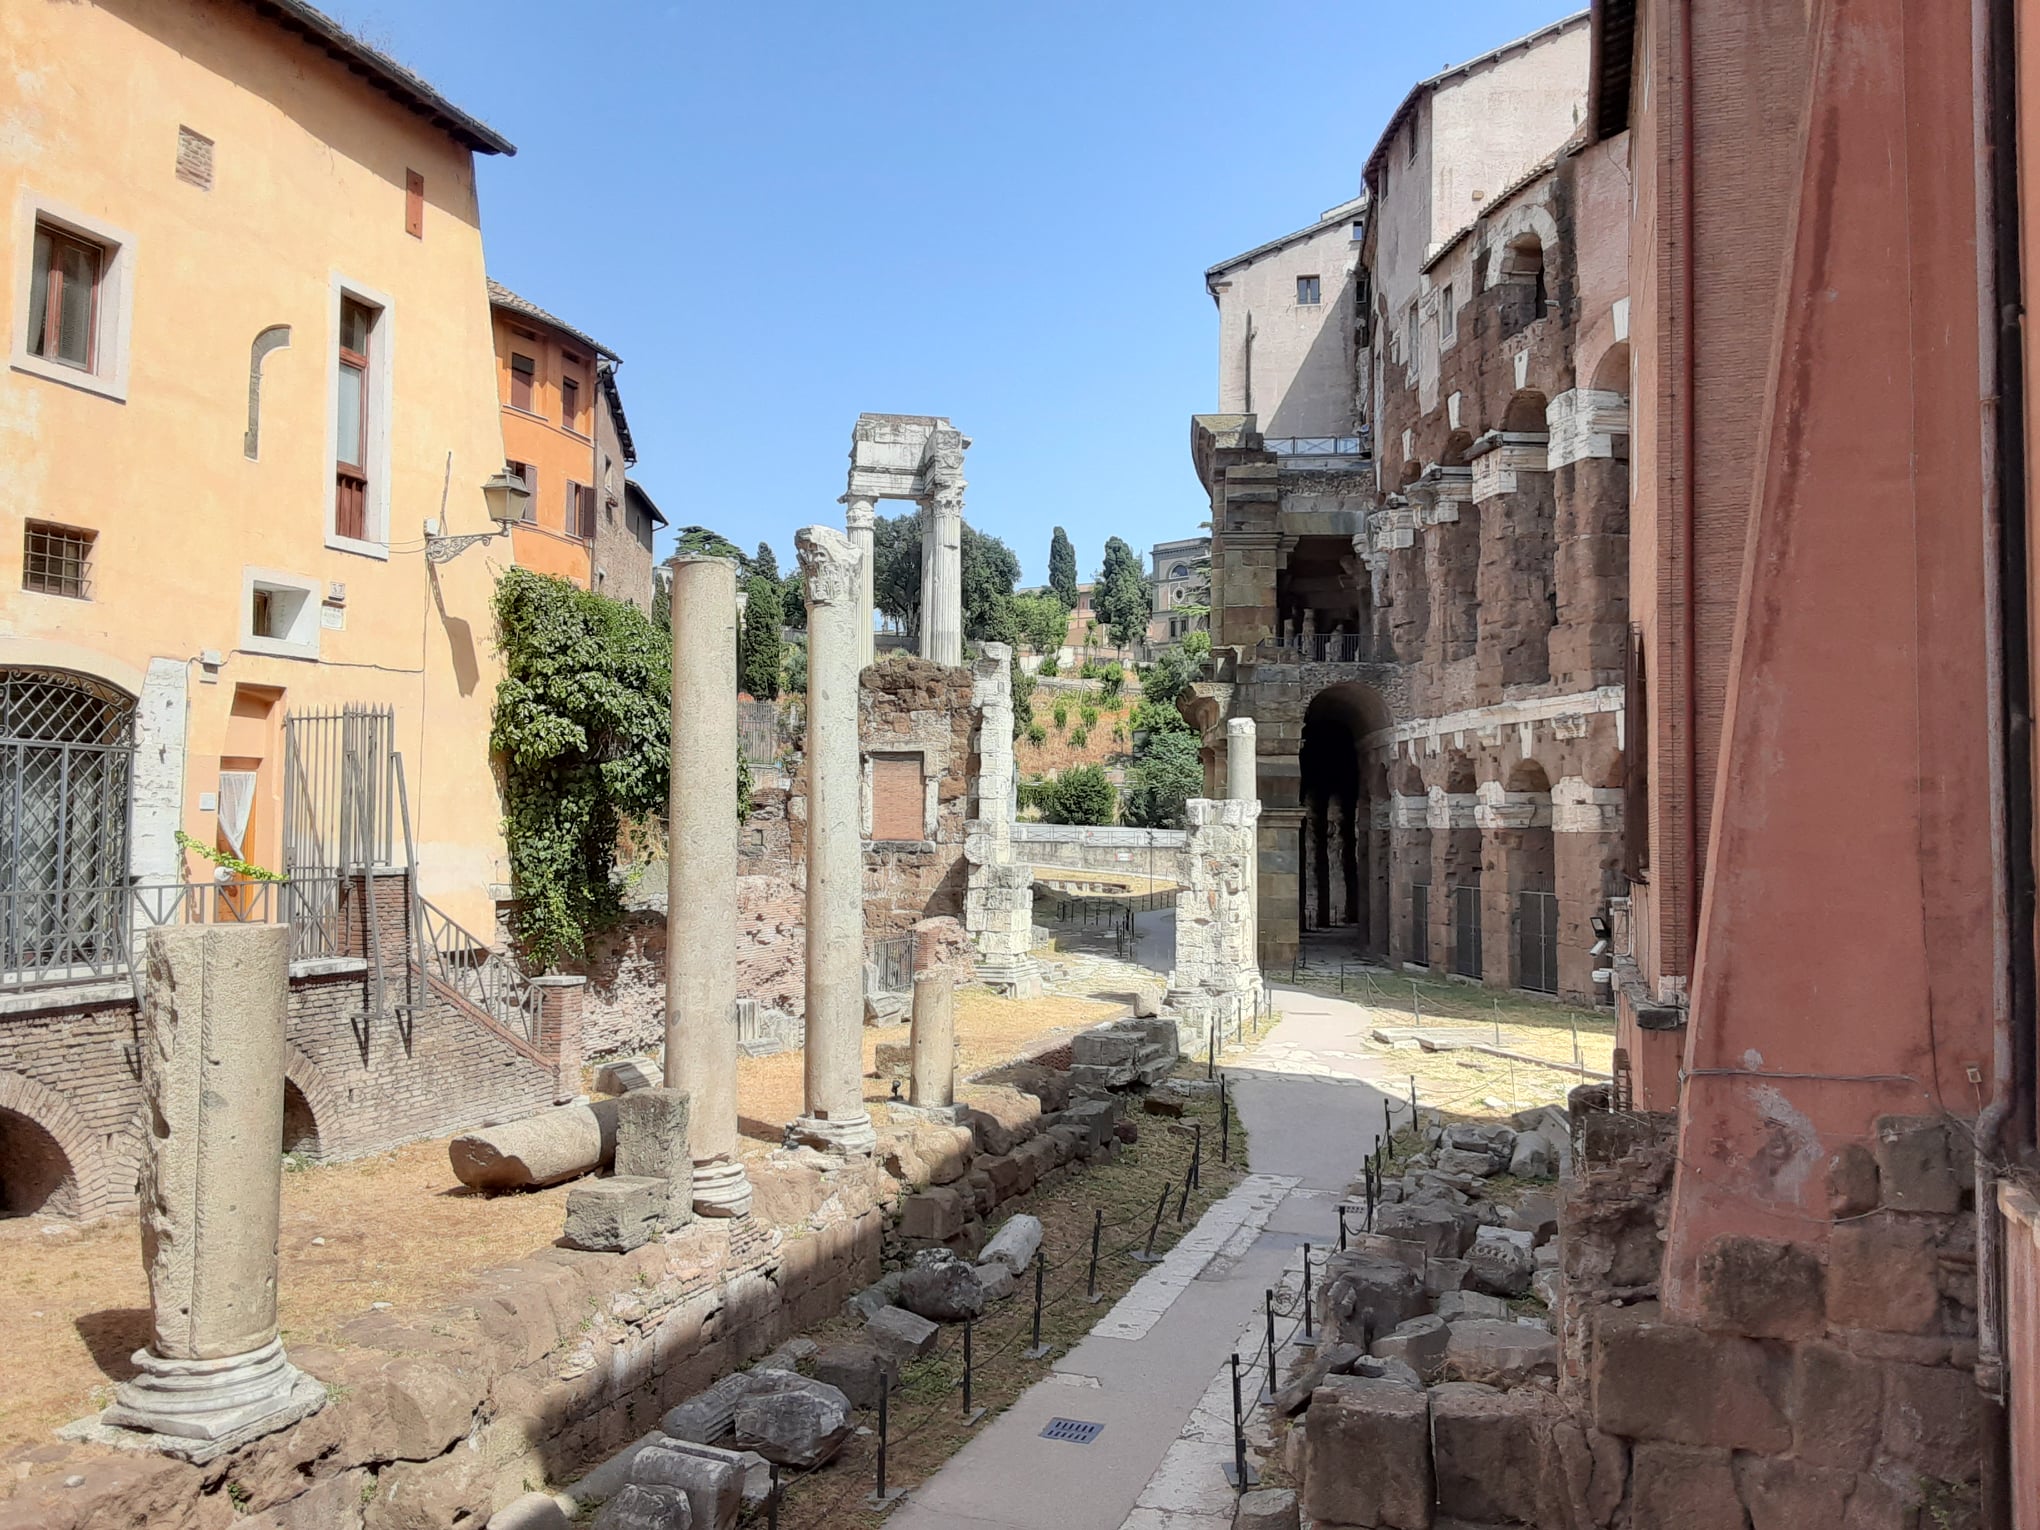 Portico of Octavia area. Theater of Marcellus on the right, Temples of Apollo Sosianus and Bellona in the distance on the left. <span class="cc-gallery-credit">[Sanjaya Thakur]</span>